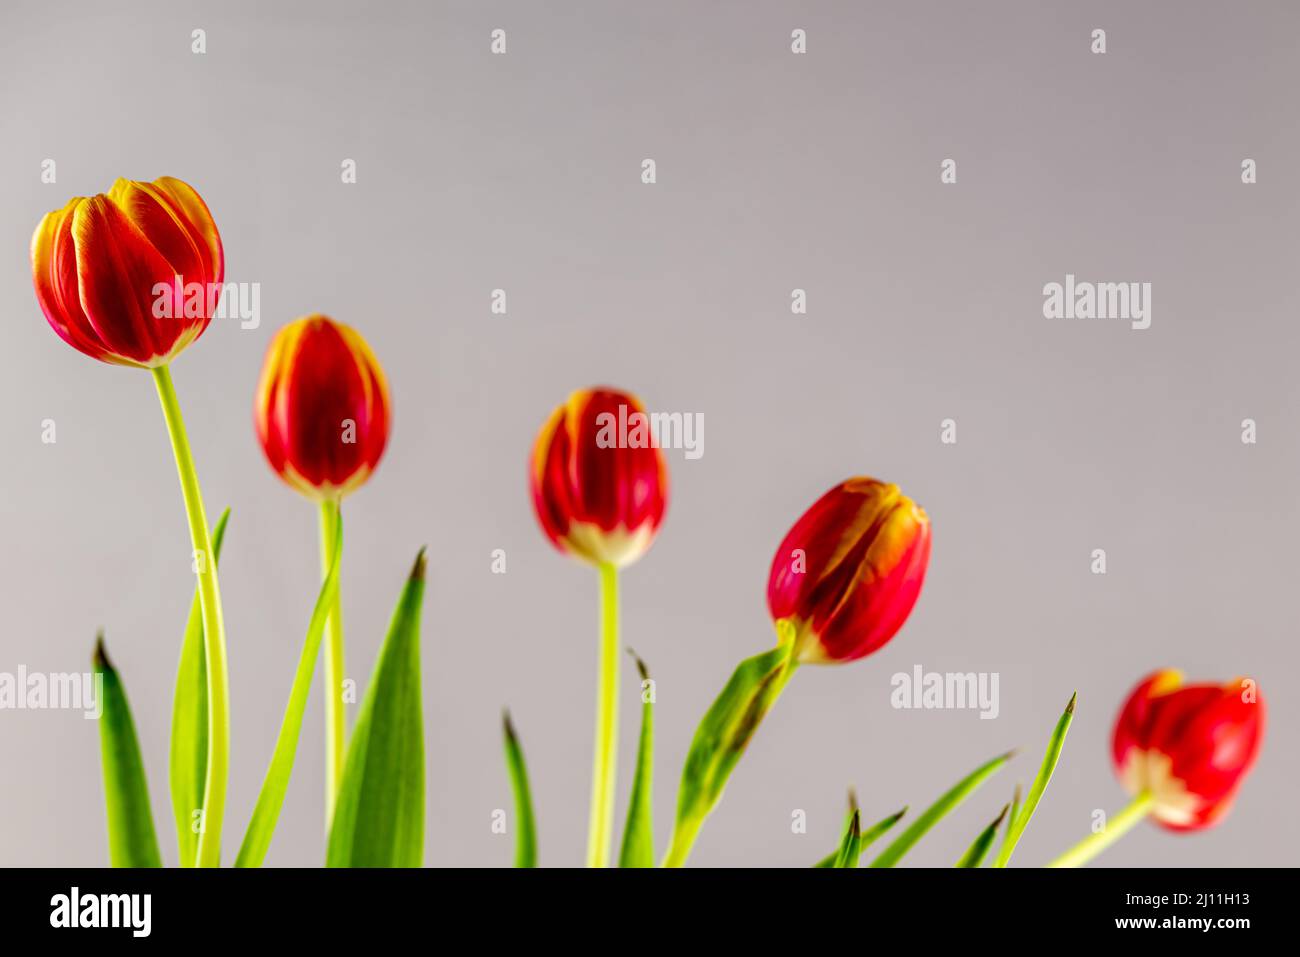 five red tulips in a row diagonally from top right to bottom right, with the focus on the left tulip, against a light background. Stock Photo